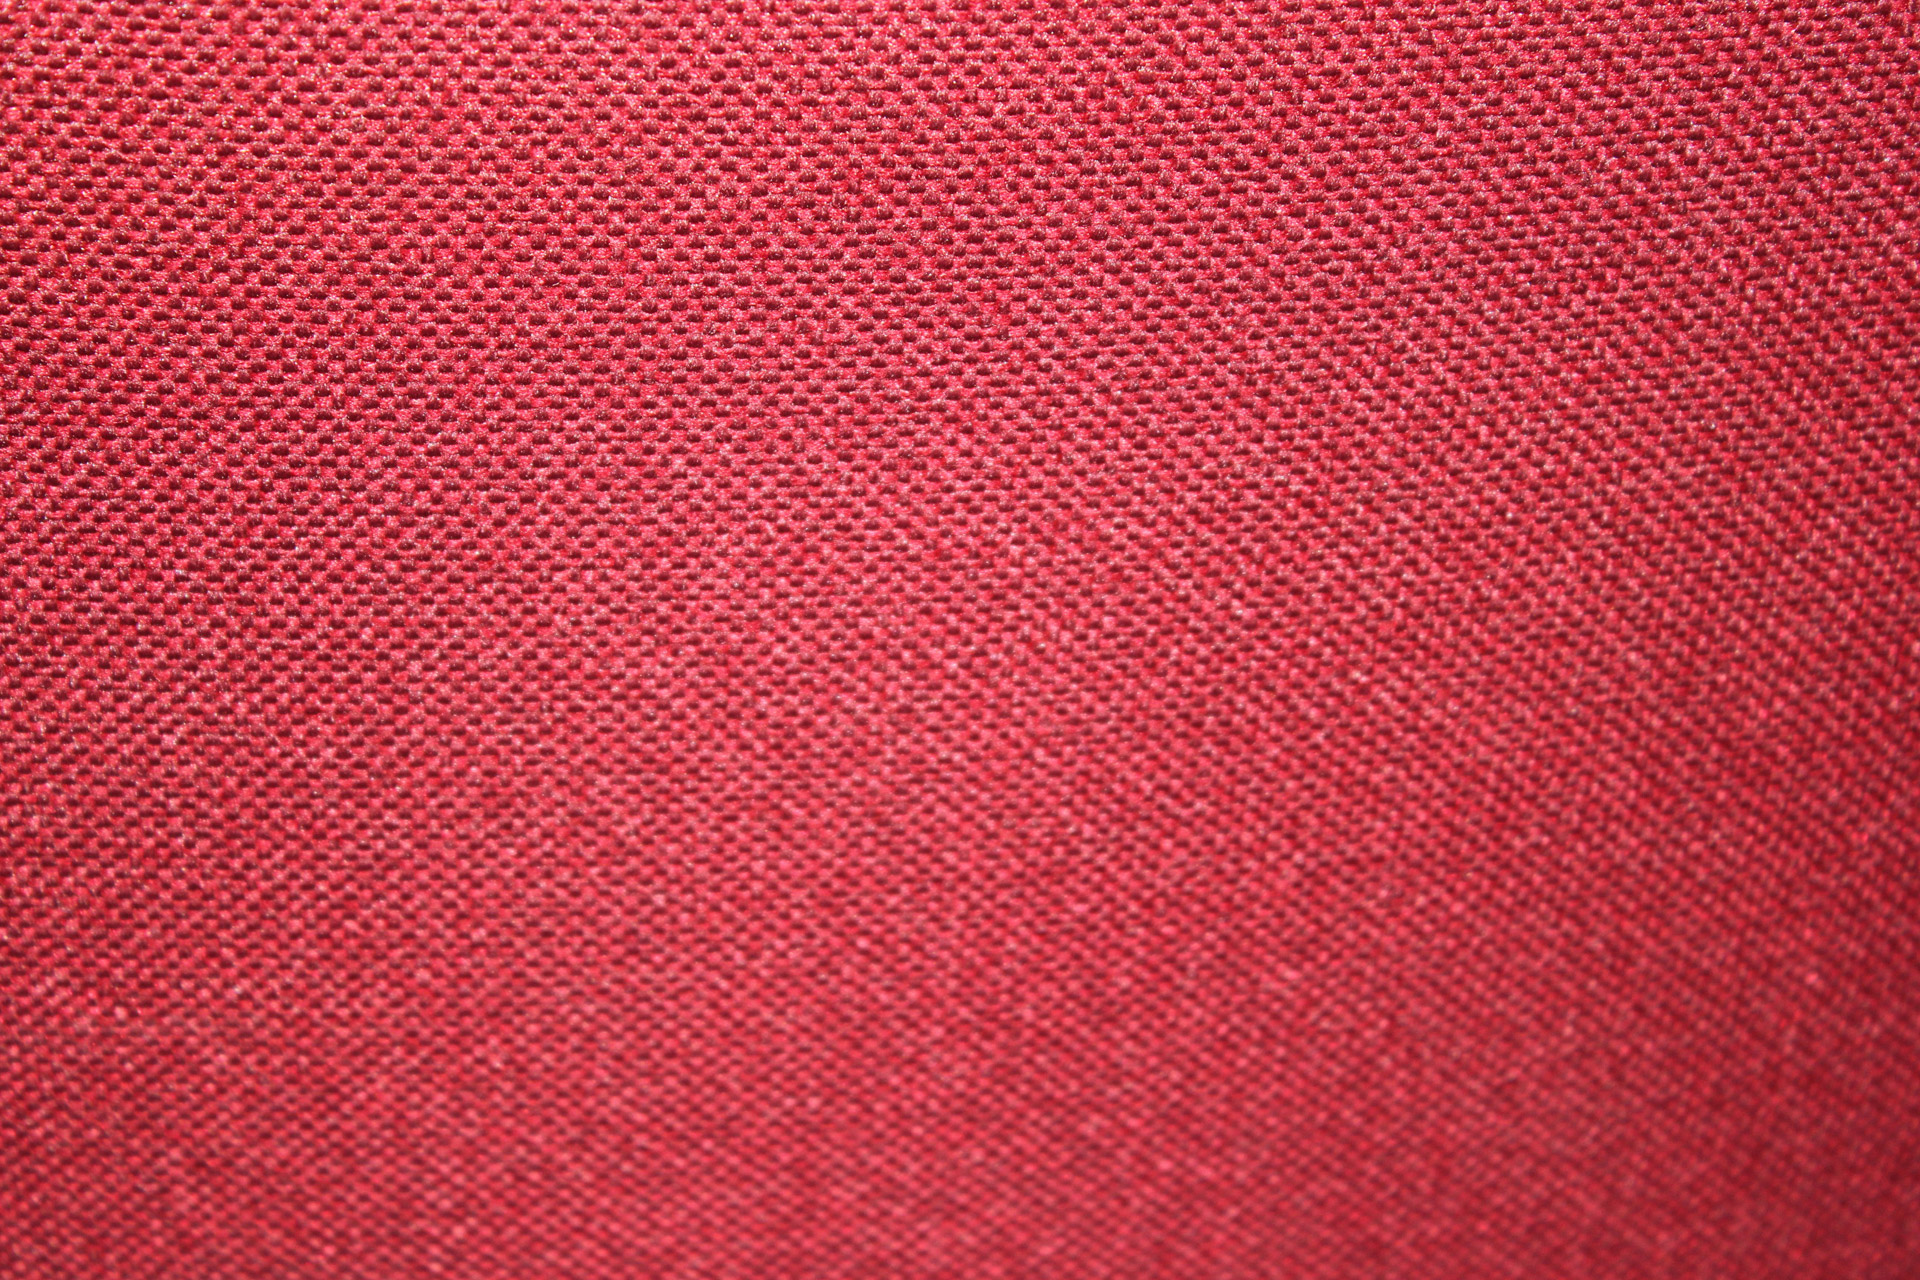 Red Cloth Background 3 Free Stock Photo Public Domain HD Wallpapers Download Free Images Wallpaper [wallpaper981.blogspot.com]